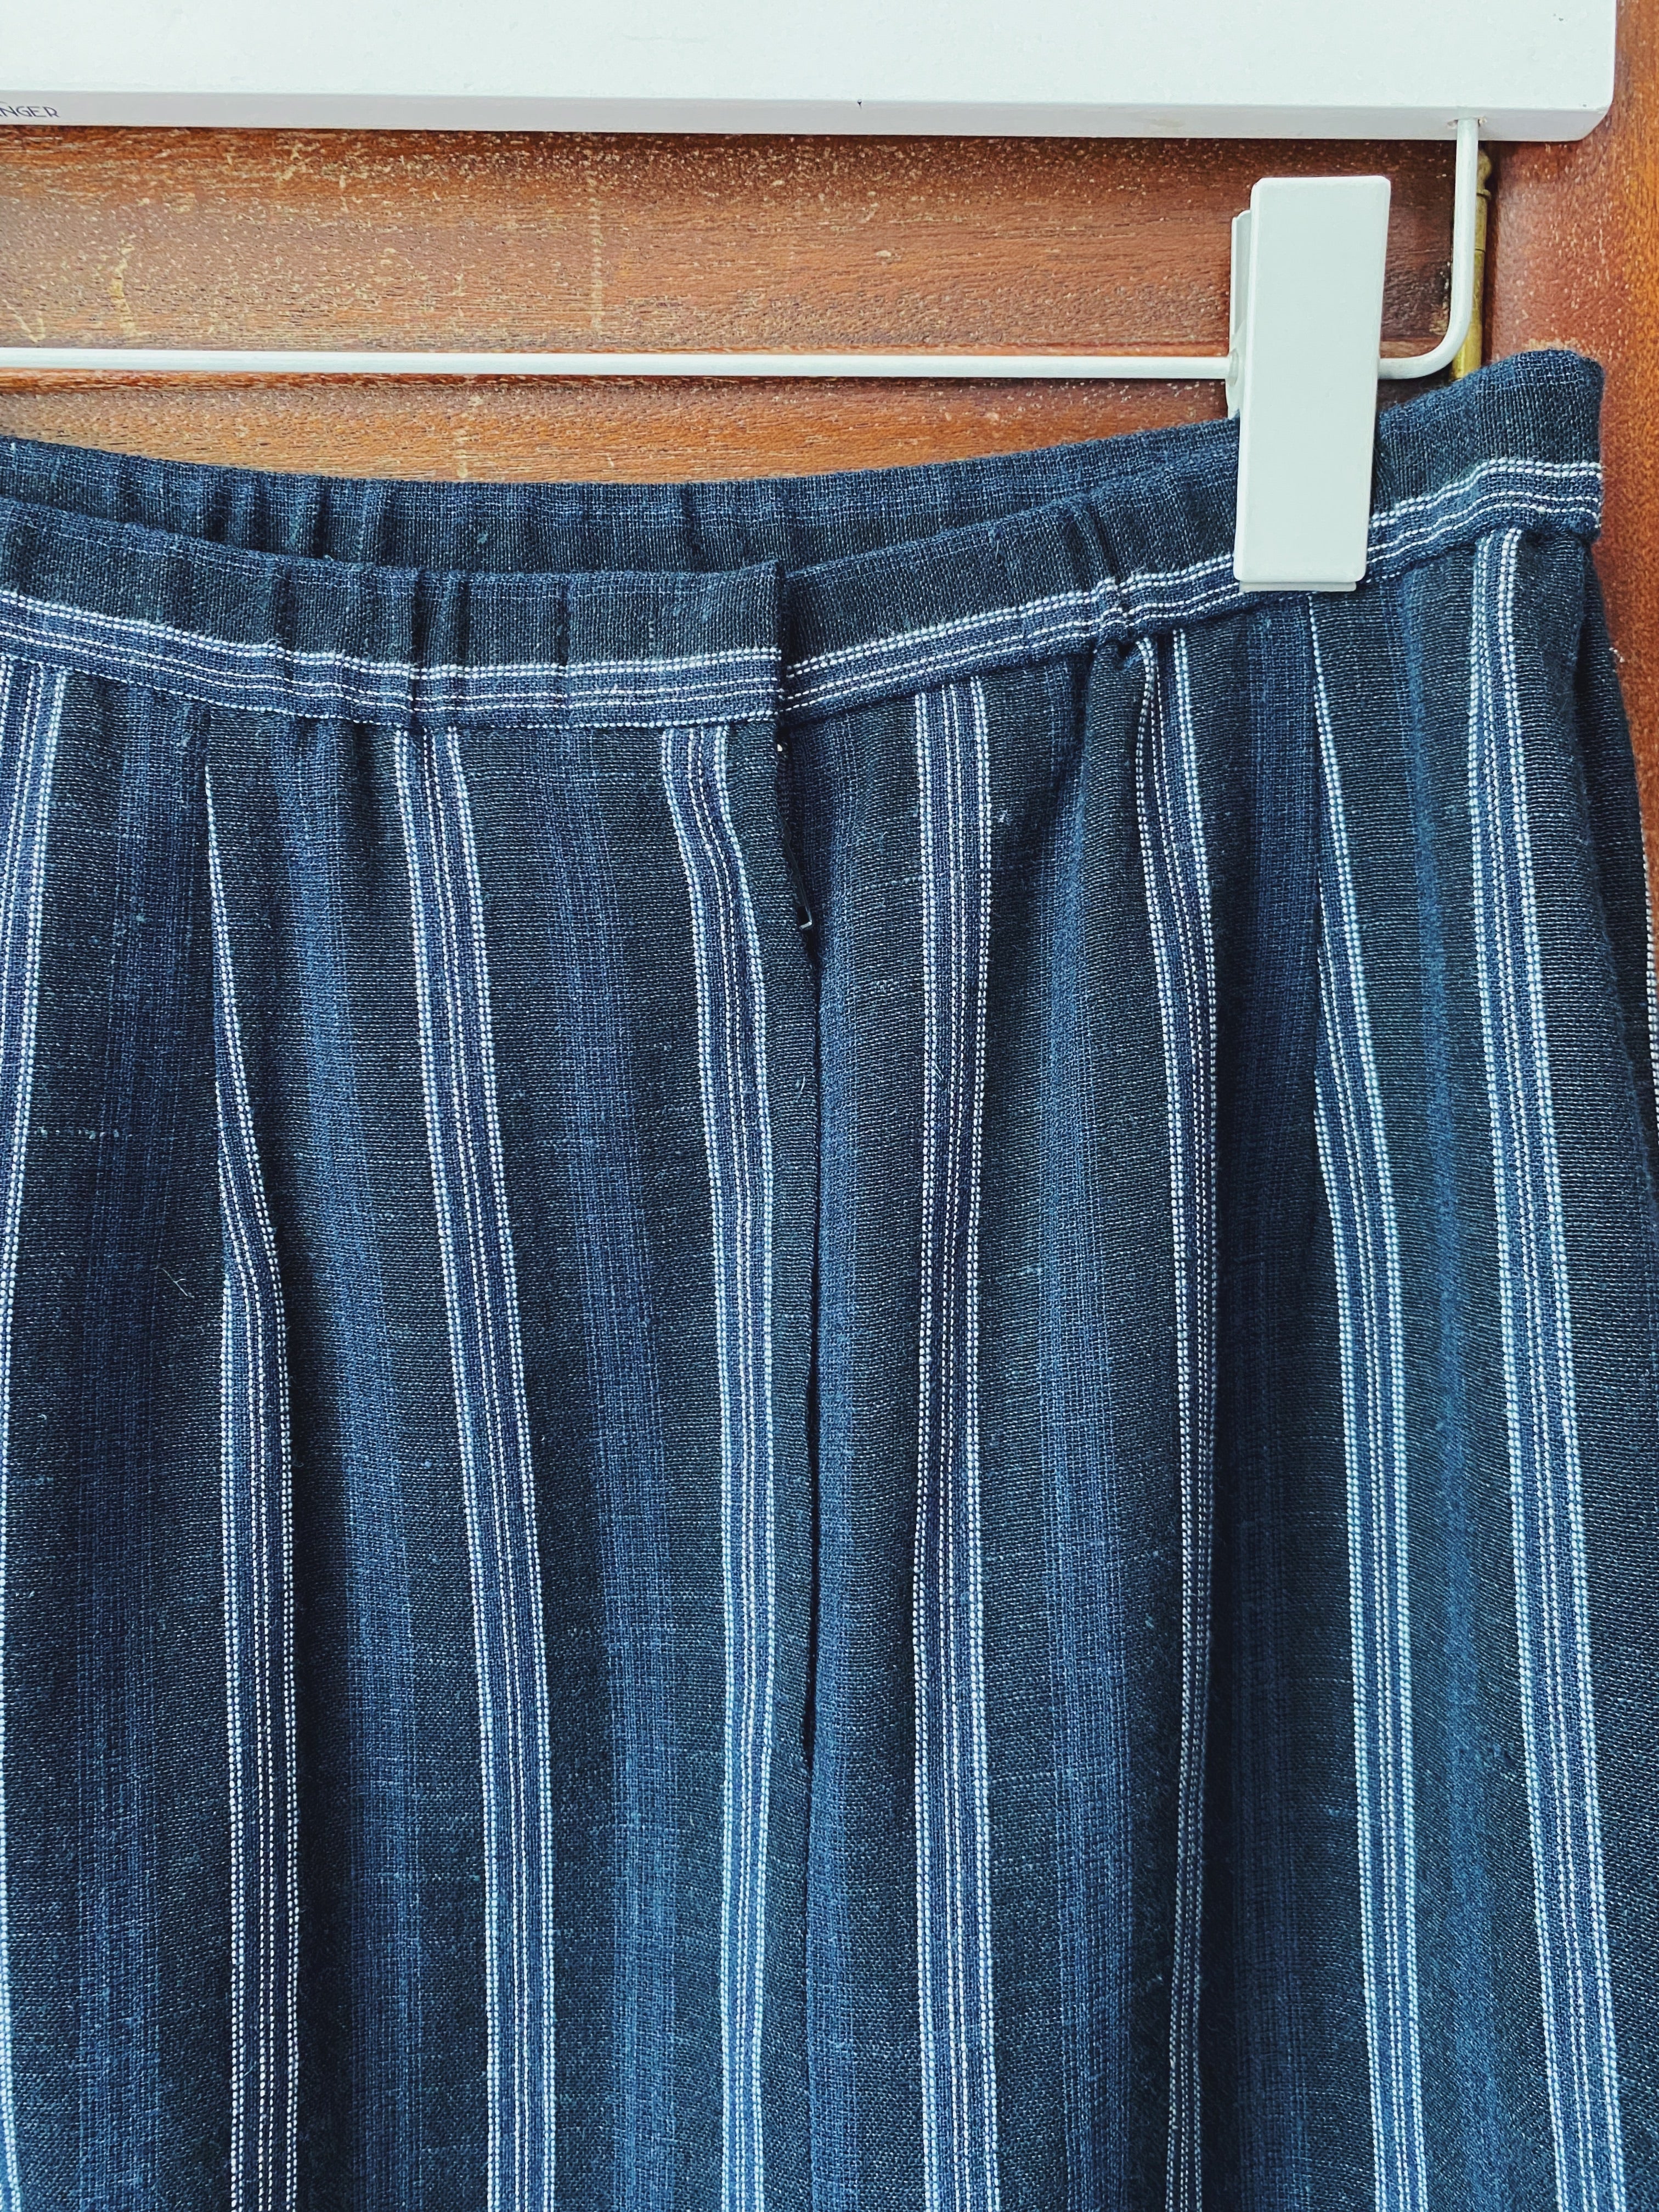 Made in the USA Vintage Pinstripe Pencil Skirt (navy)